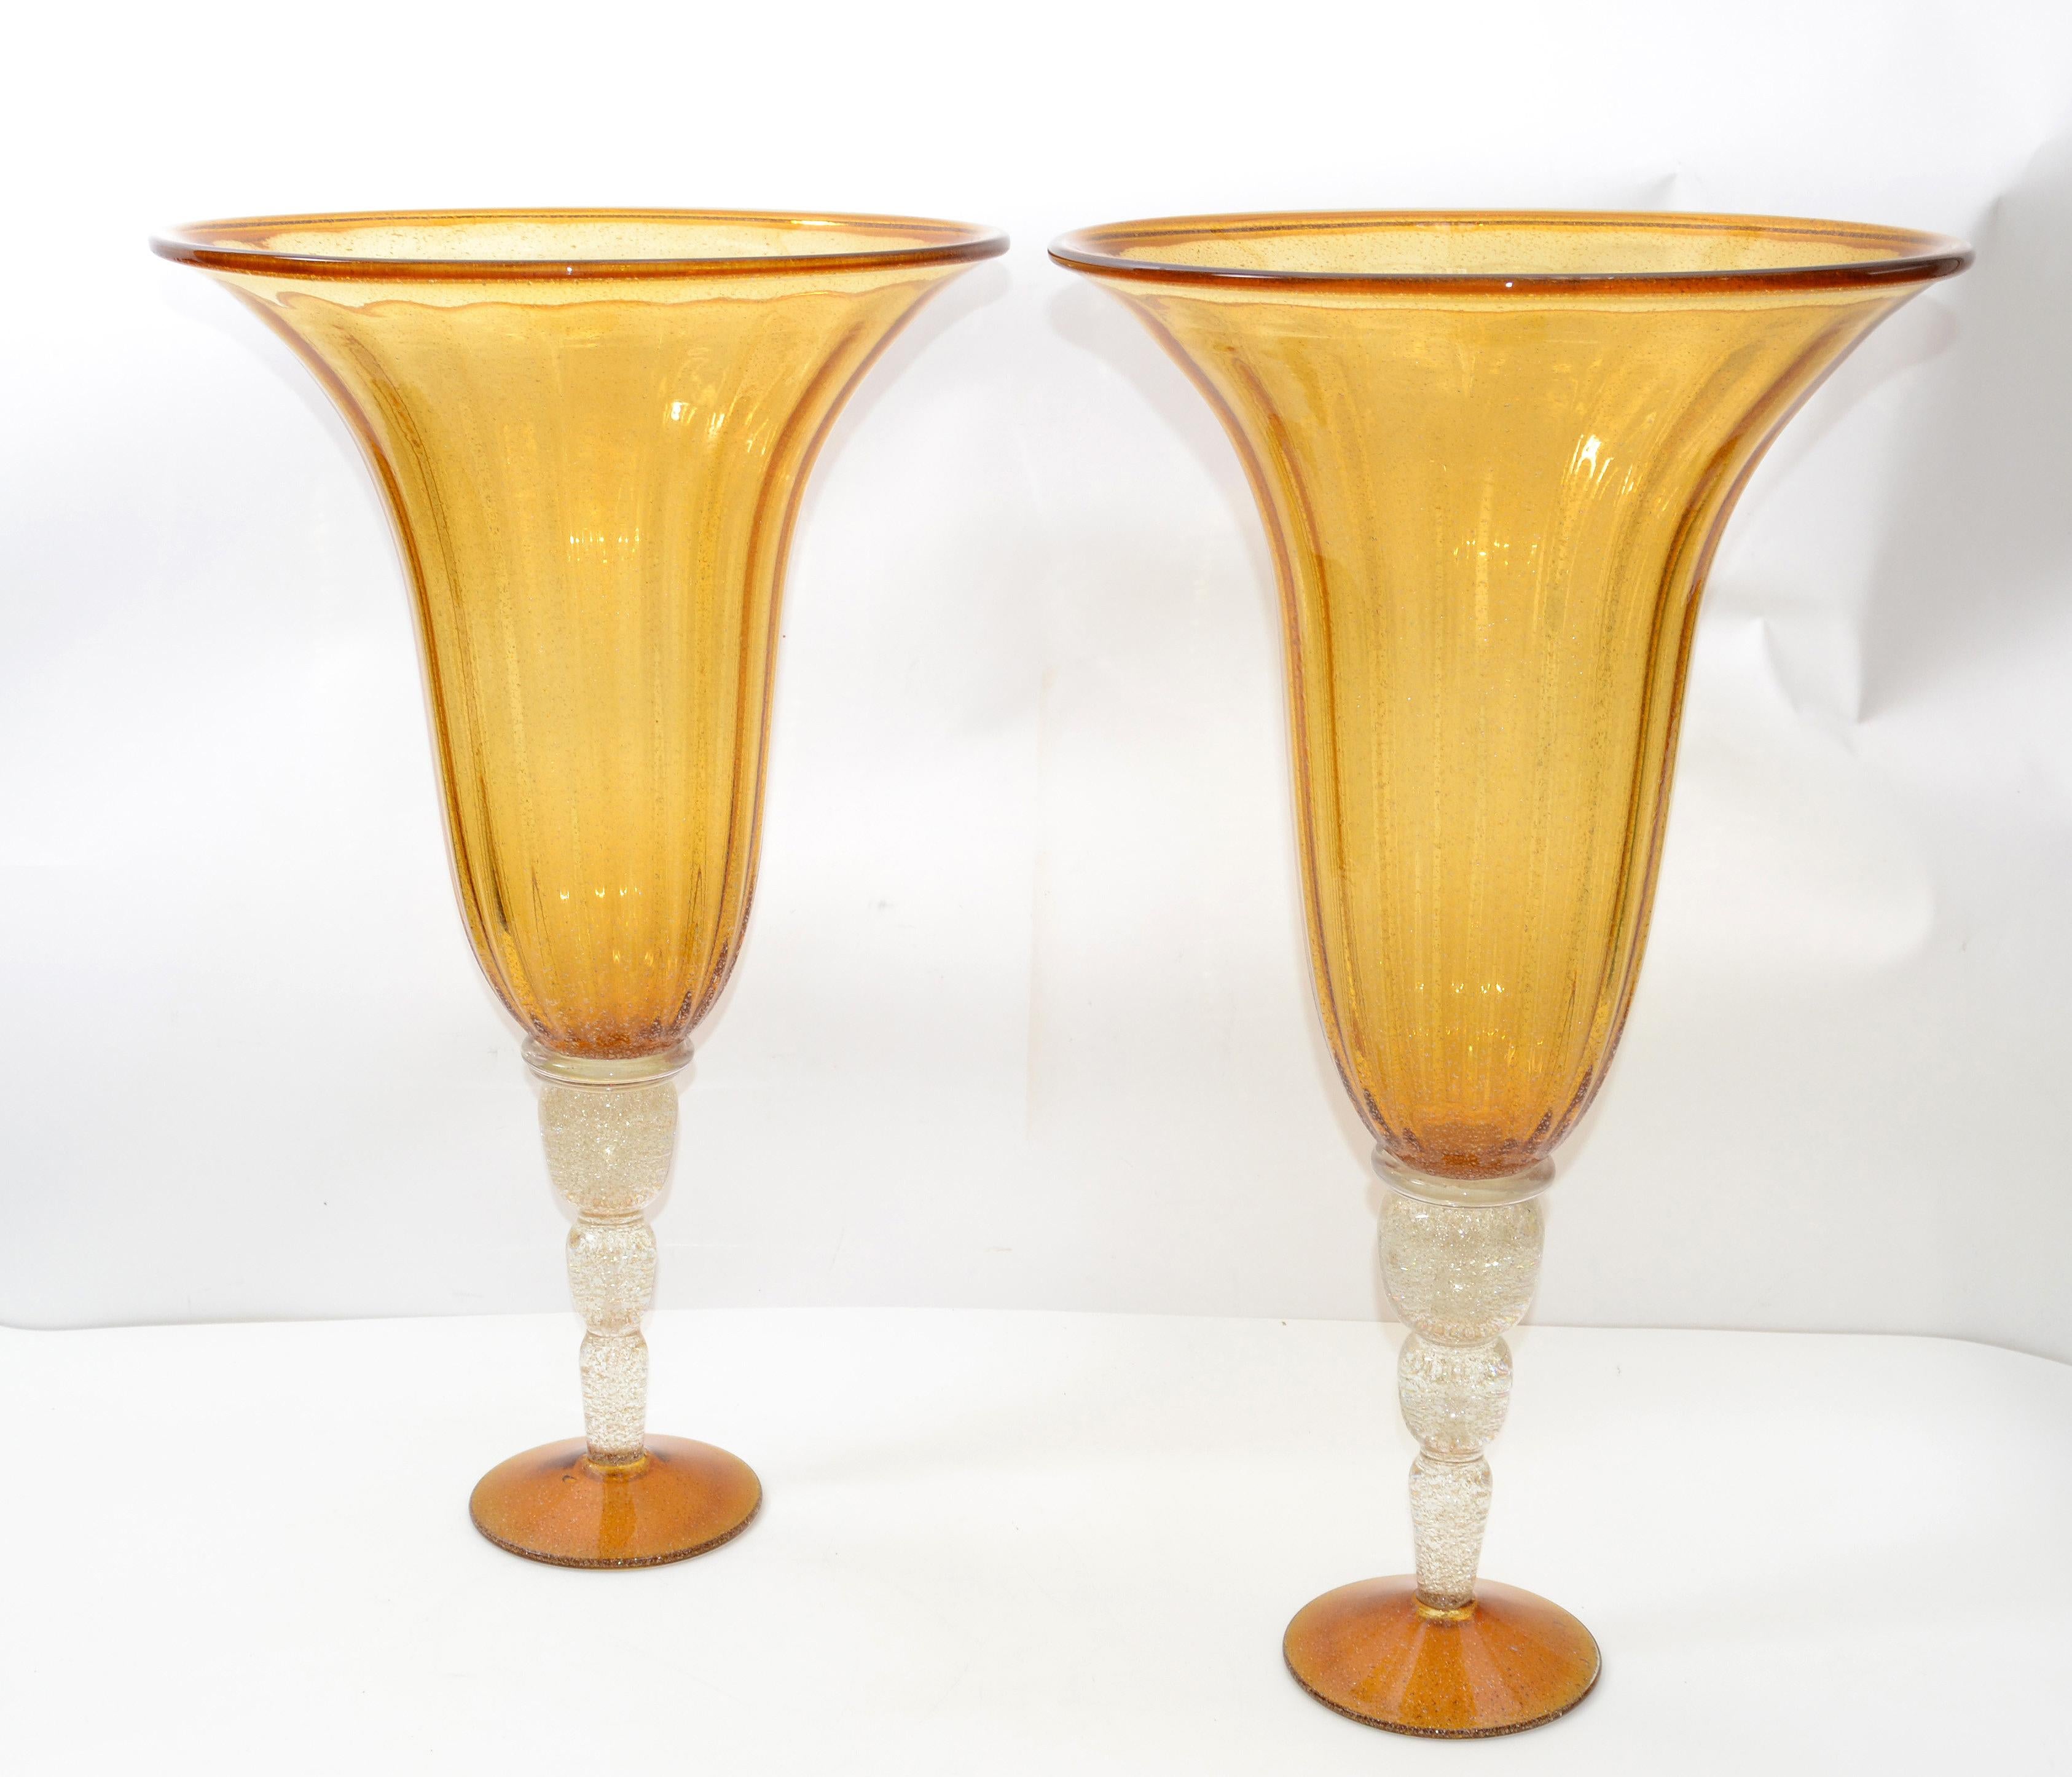 Two tall Venetian Mid-Century Modern Murano amber and clear blown art glass floor flower vase with infused gold flakes and gold dust.
Made in Italy in the late 1970s.
Impressive in form and size.
Measures: Diameter 14.5 & 15.5 inches.
  